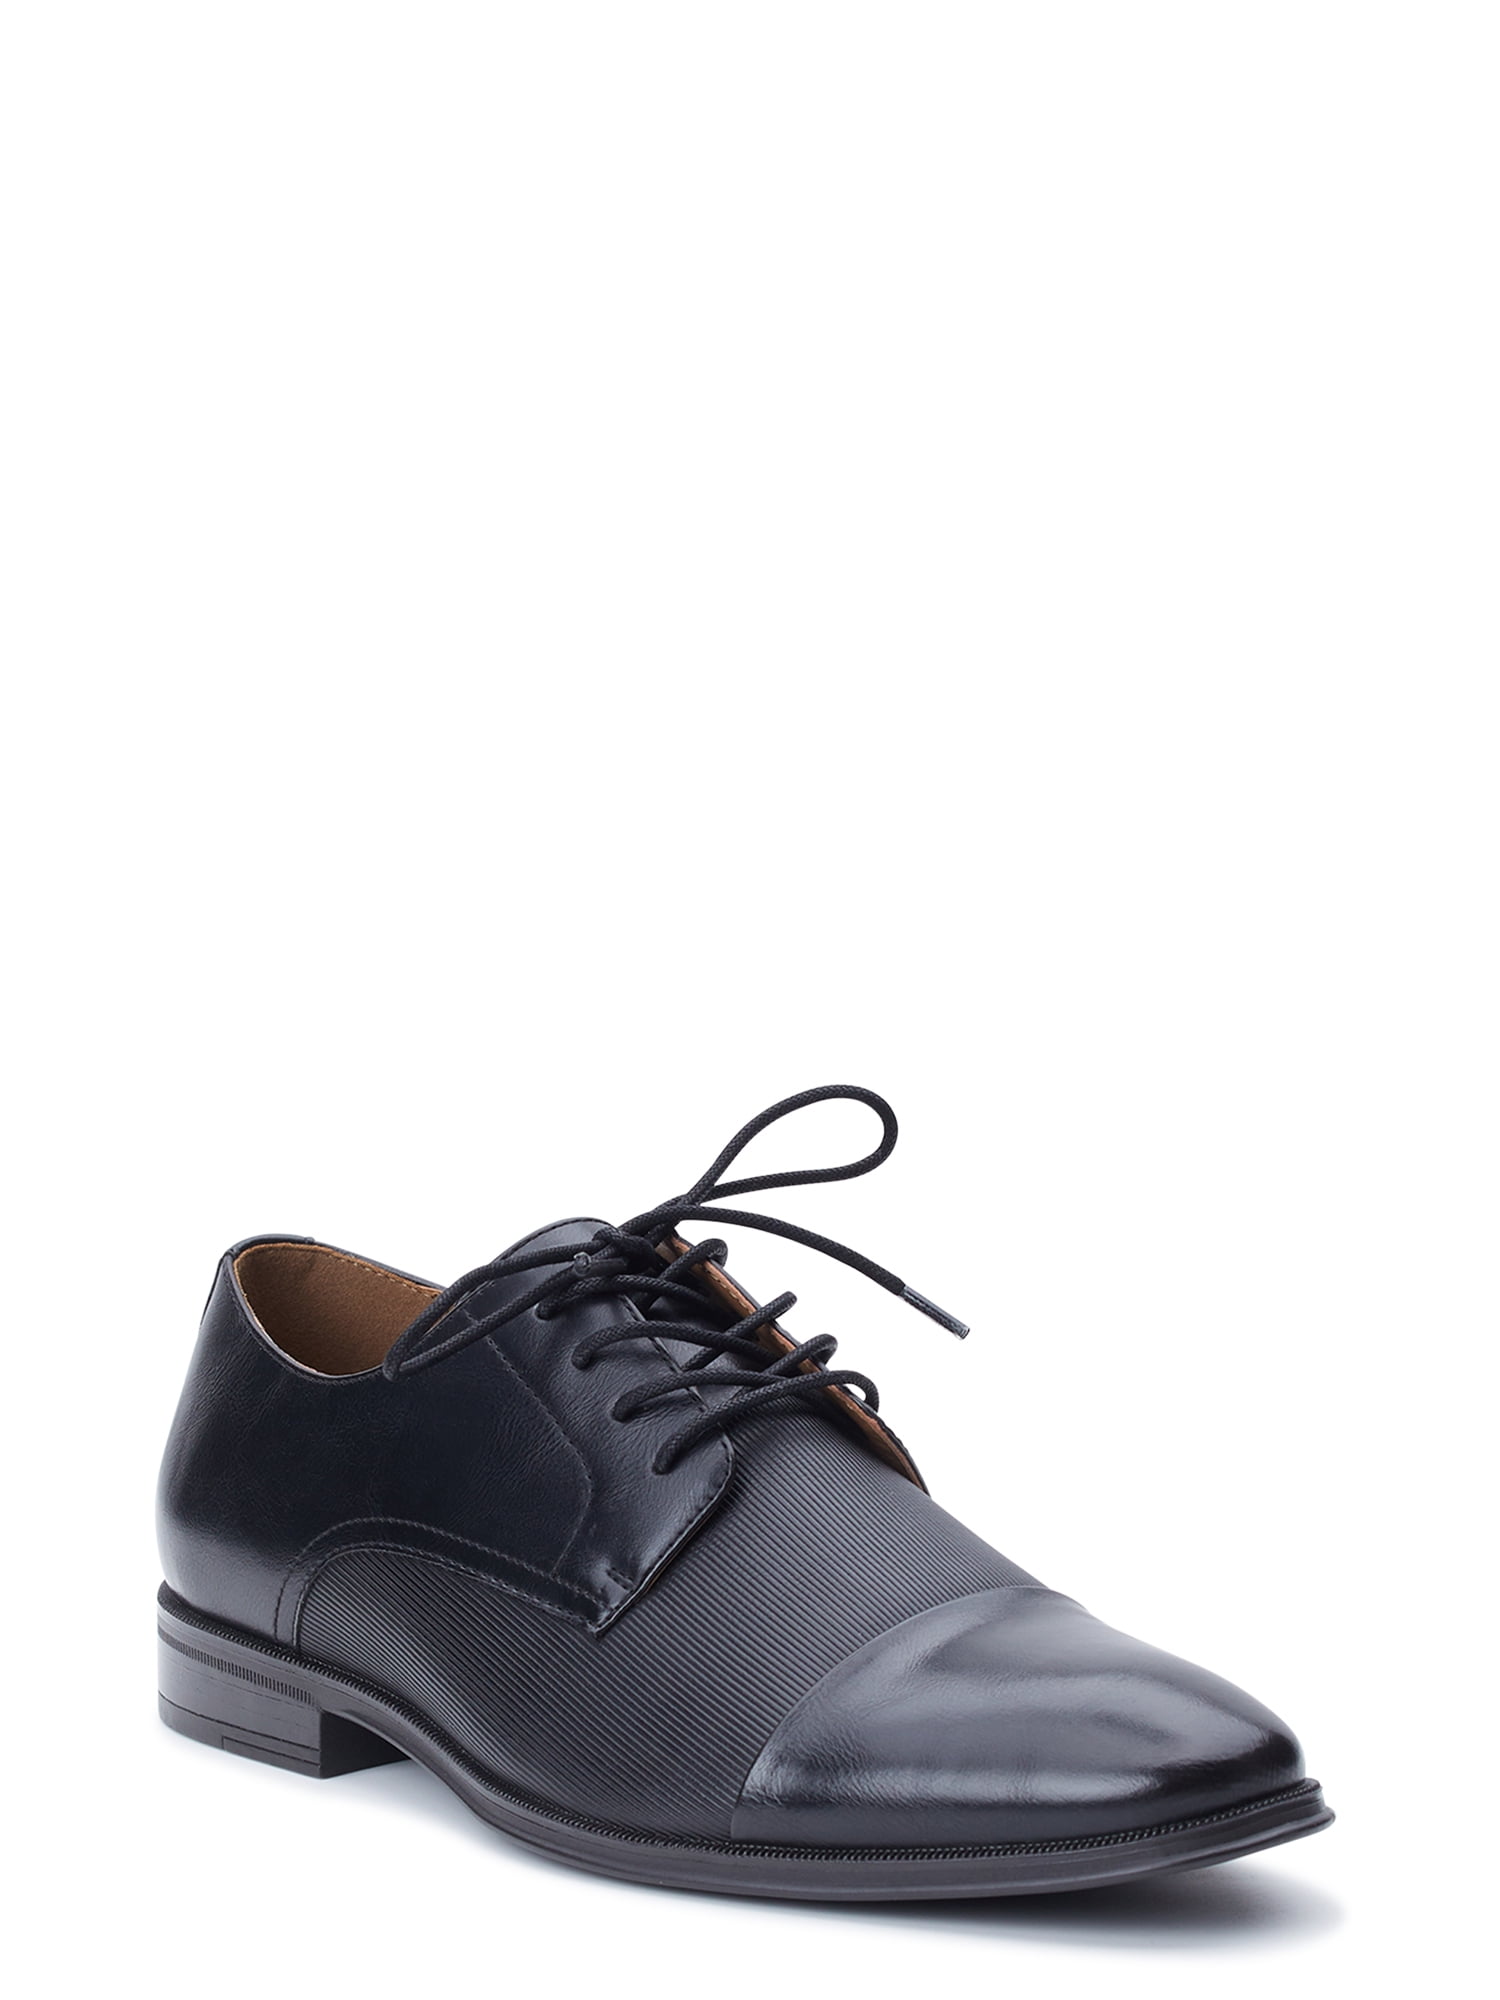 Dress Oxford Shoes for Men Lace Up Checkered Round